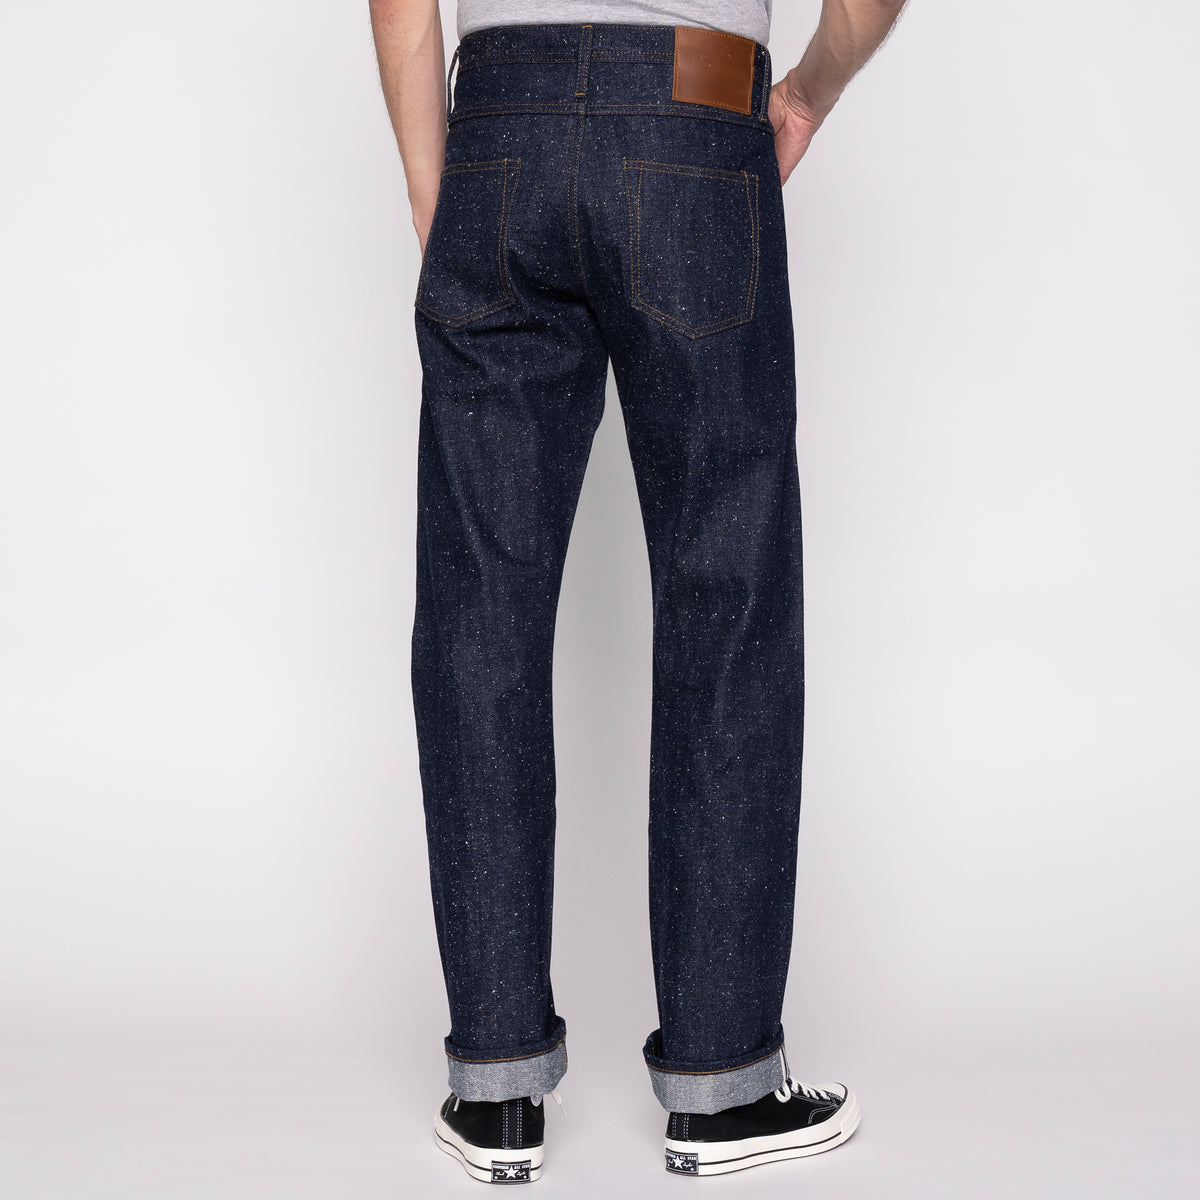 Straight Fit - 18oz Neppy Selvedge | The Unbranded Brand